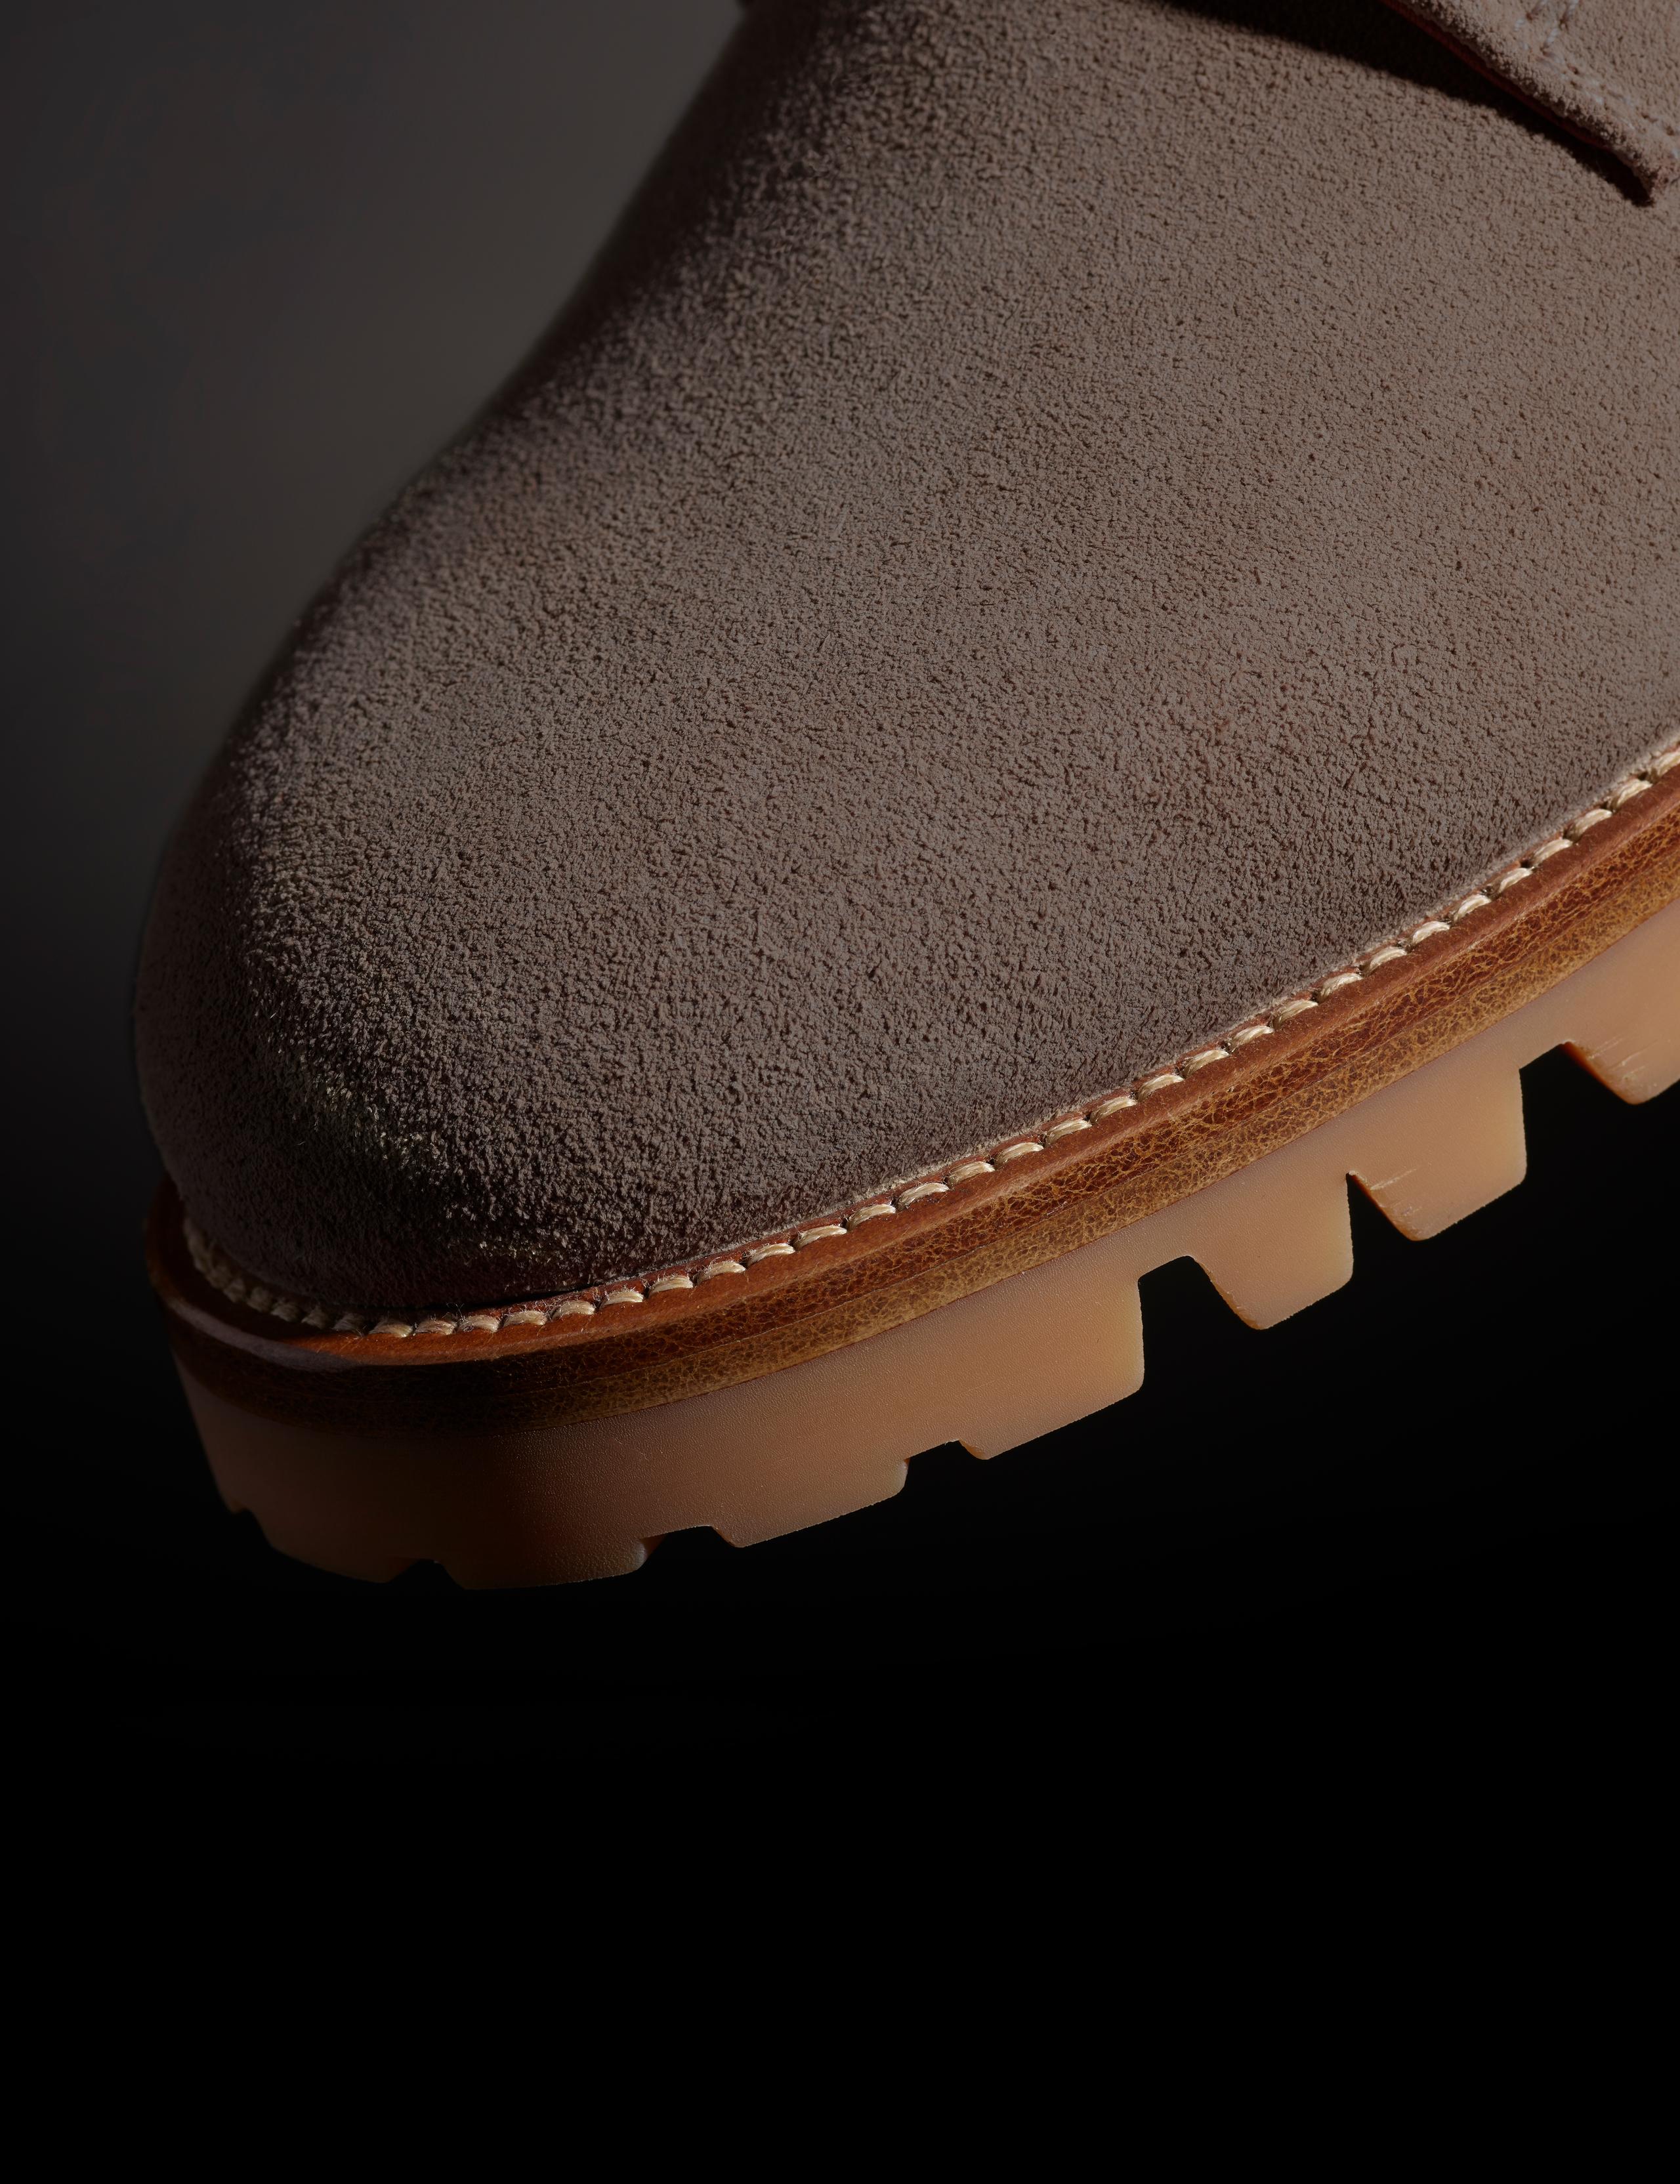 Closeup view of Ojai City Boot toe and sole